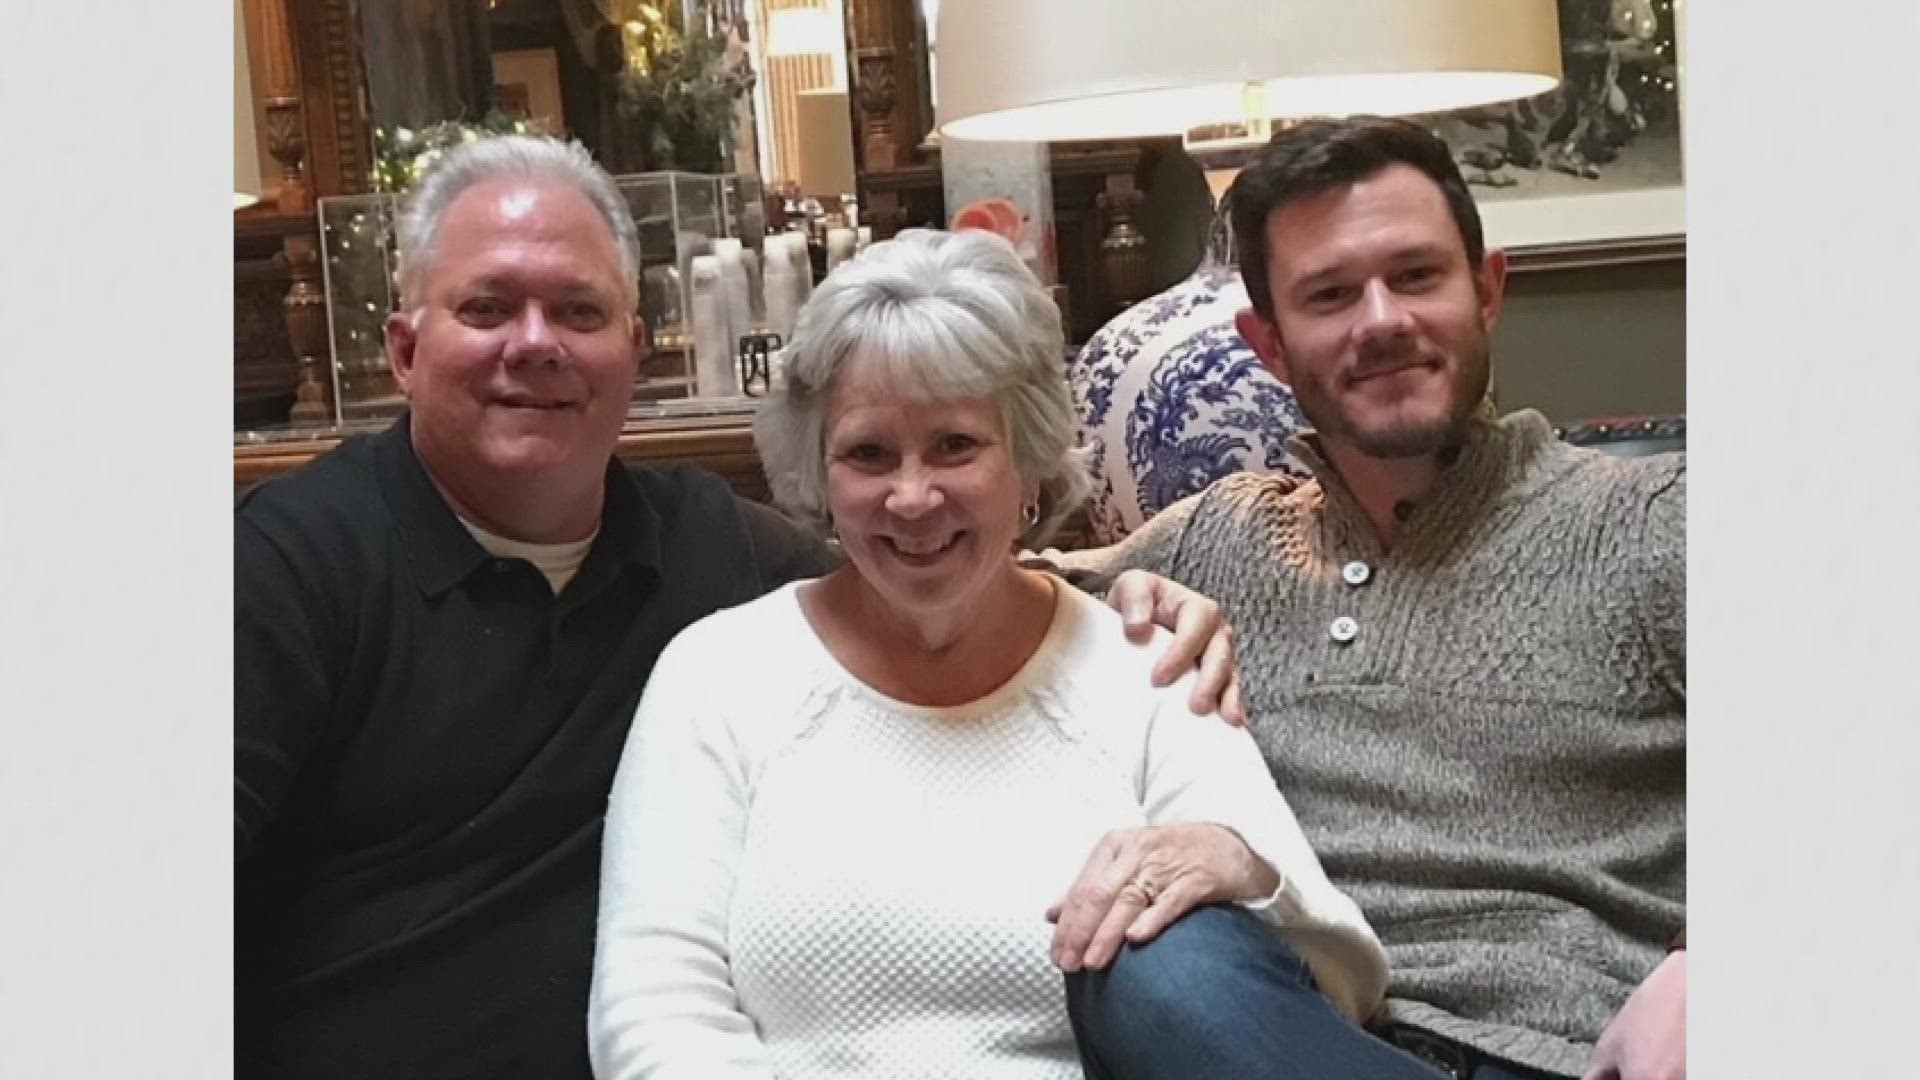 The fentanyl crisis has become a mounting problem in Colorado that is taking the lives of many. The parents of Jonathan Ellington share how they've been impacted.